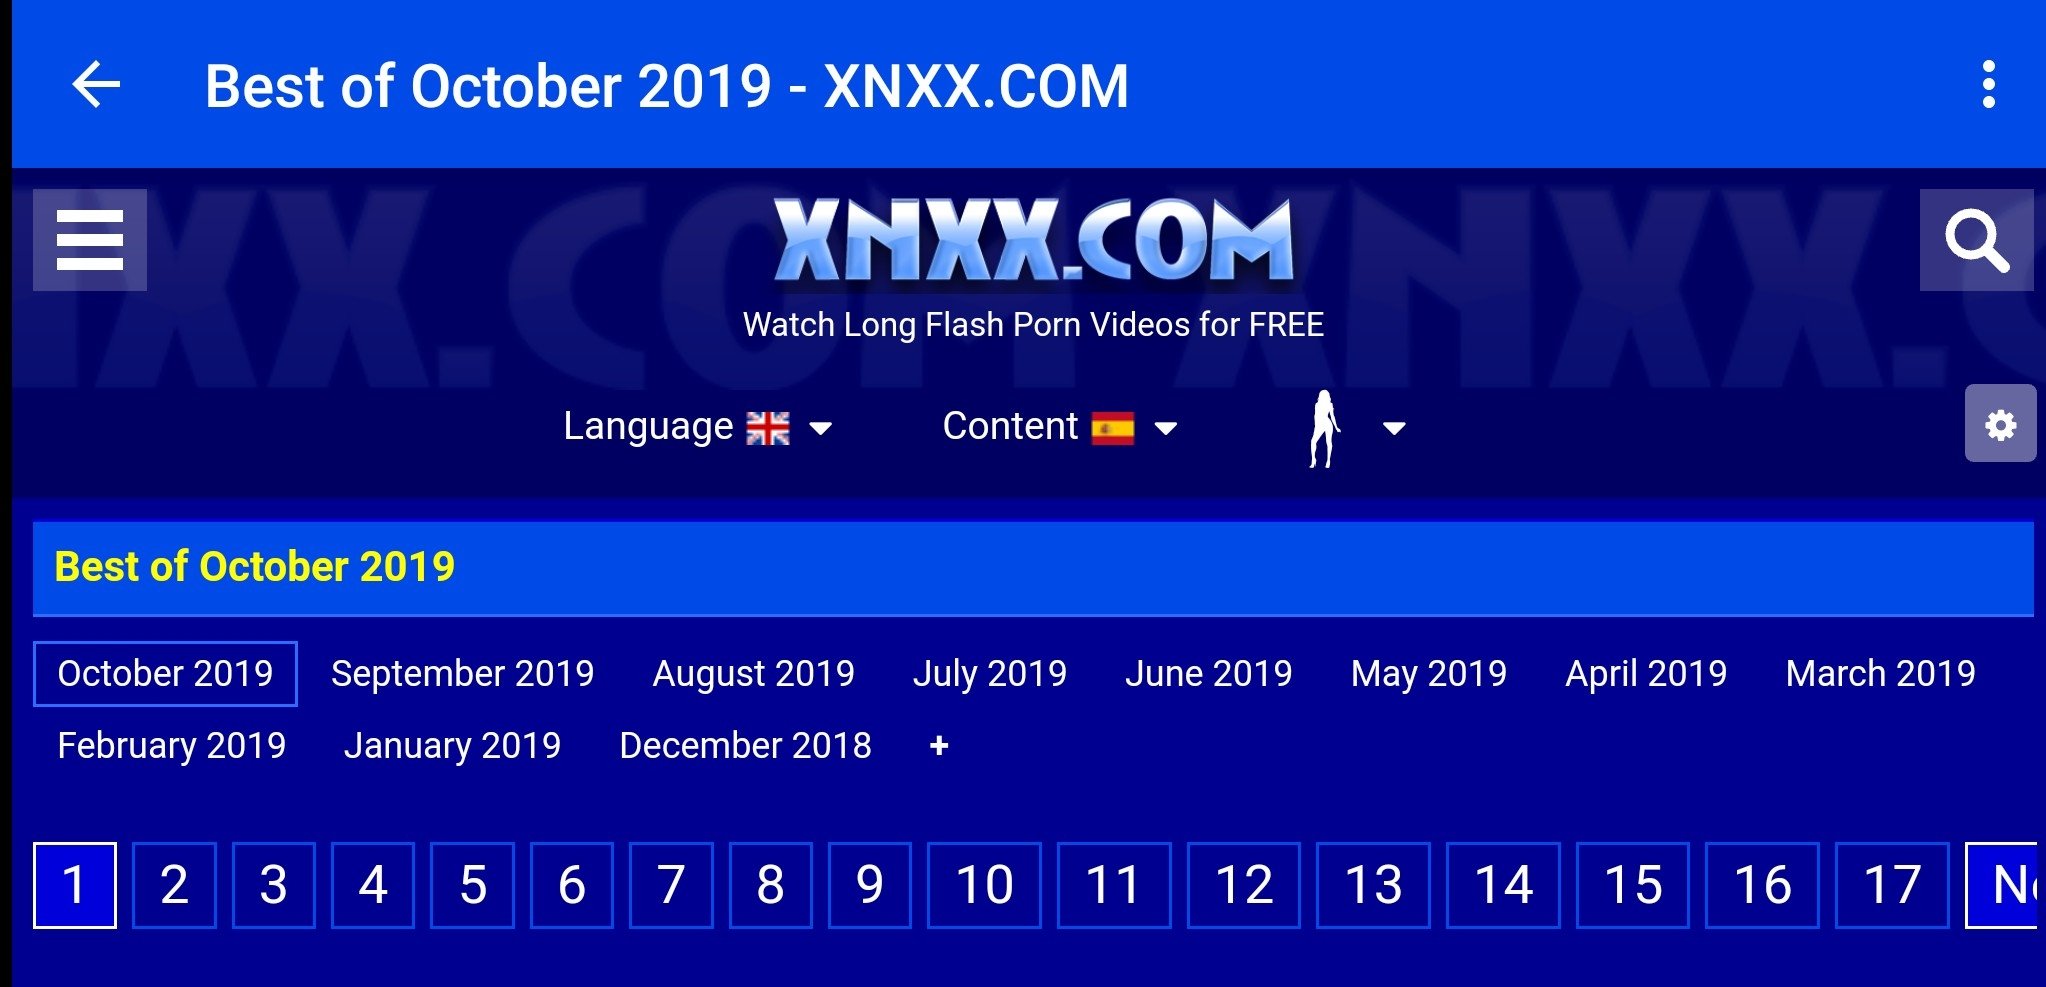 Download xnxx videos for free